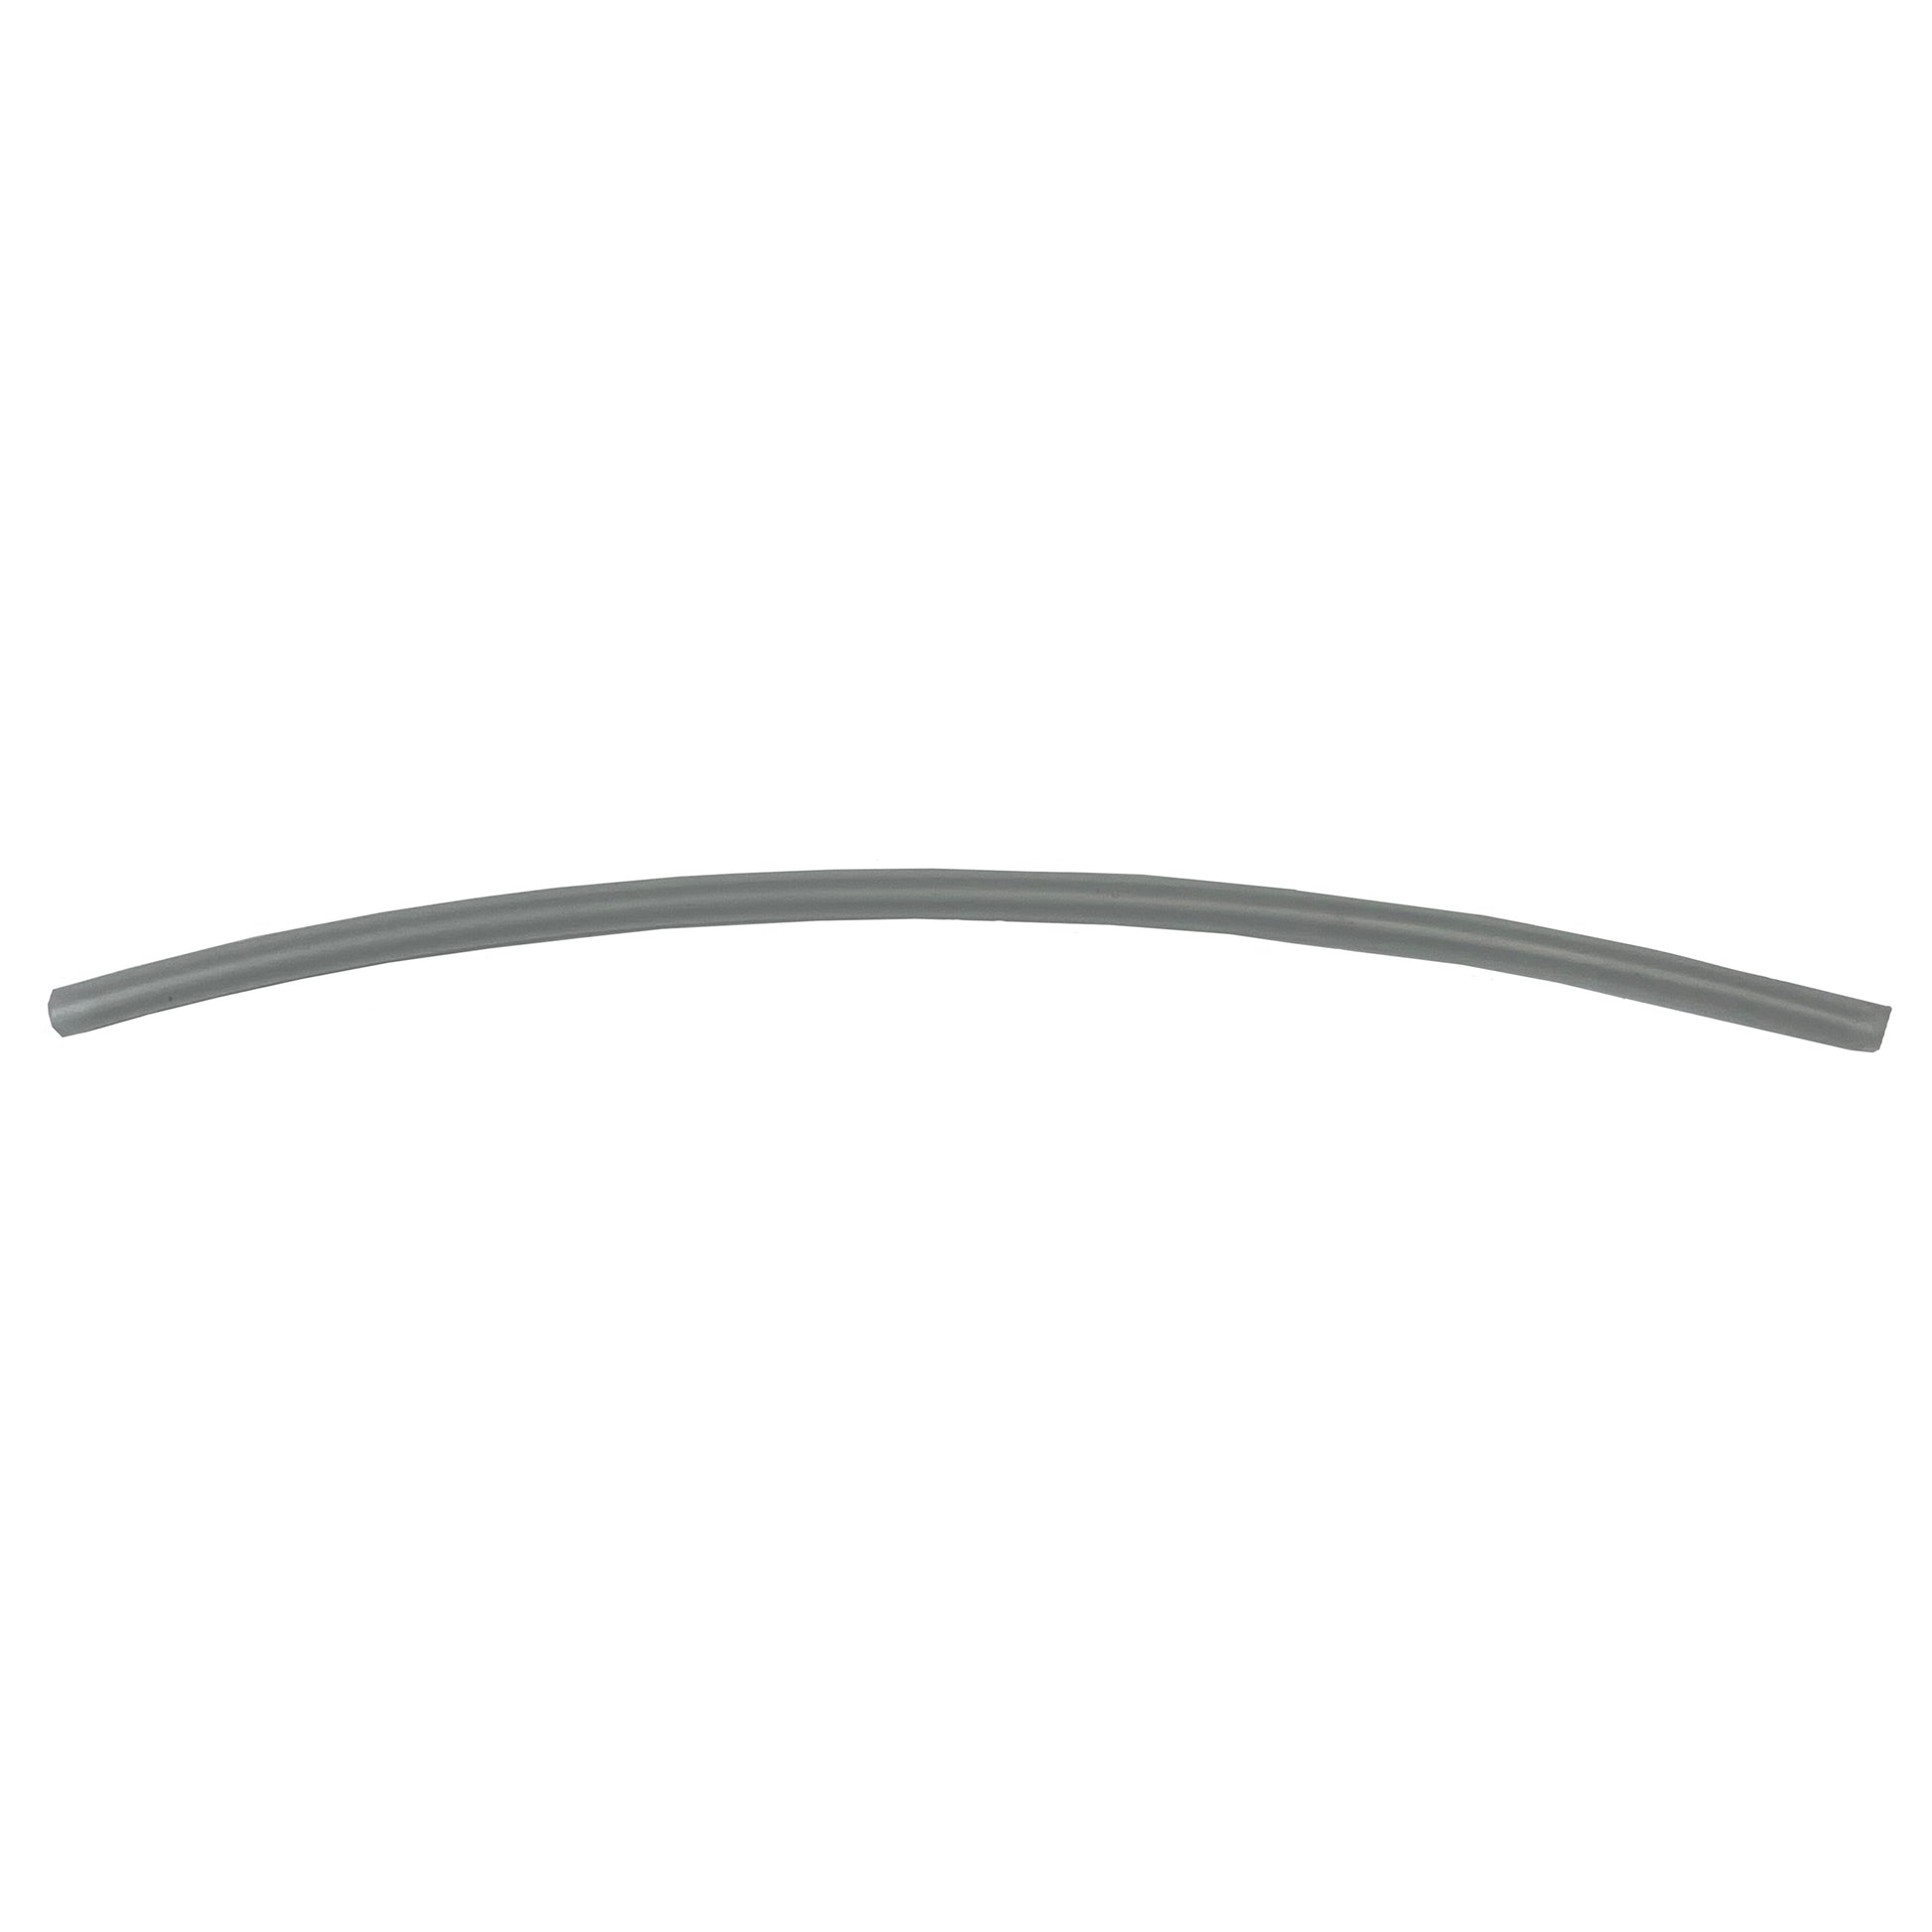 Flexible Thin Single Wall Non-Adhesive Heat Shrink Tubing 2:1 Clear 1/8" ID - 12" Inch 10 Pack